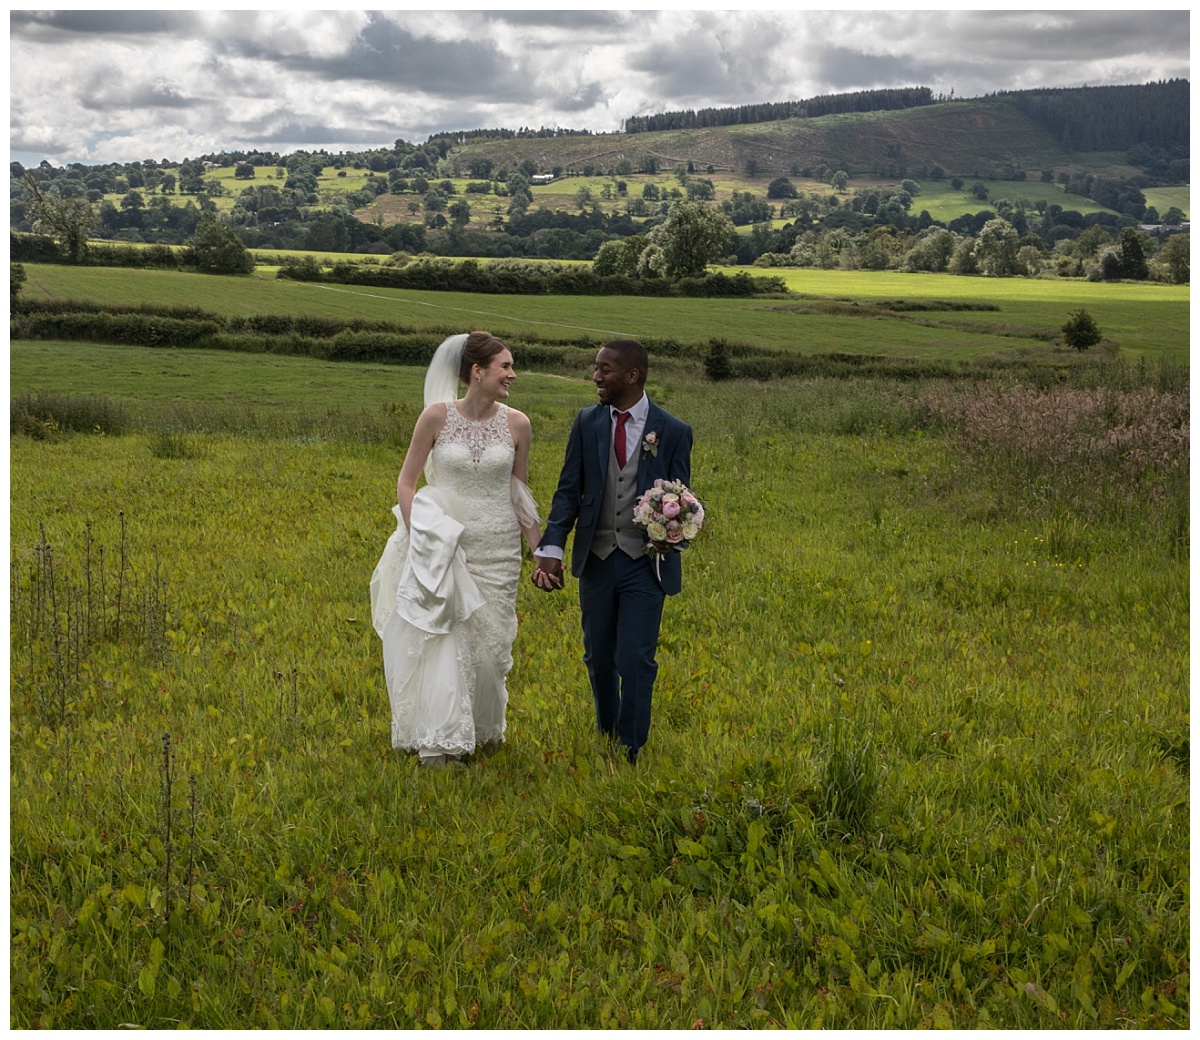 Wedding Photography Manchester - Clair and Peter's Bashal Barn Wedding Day 61